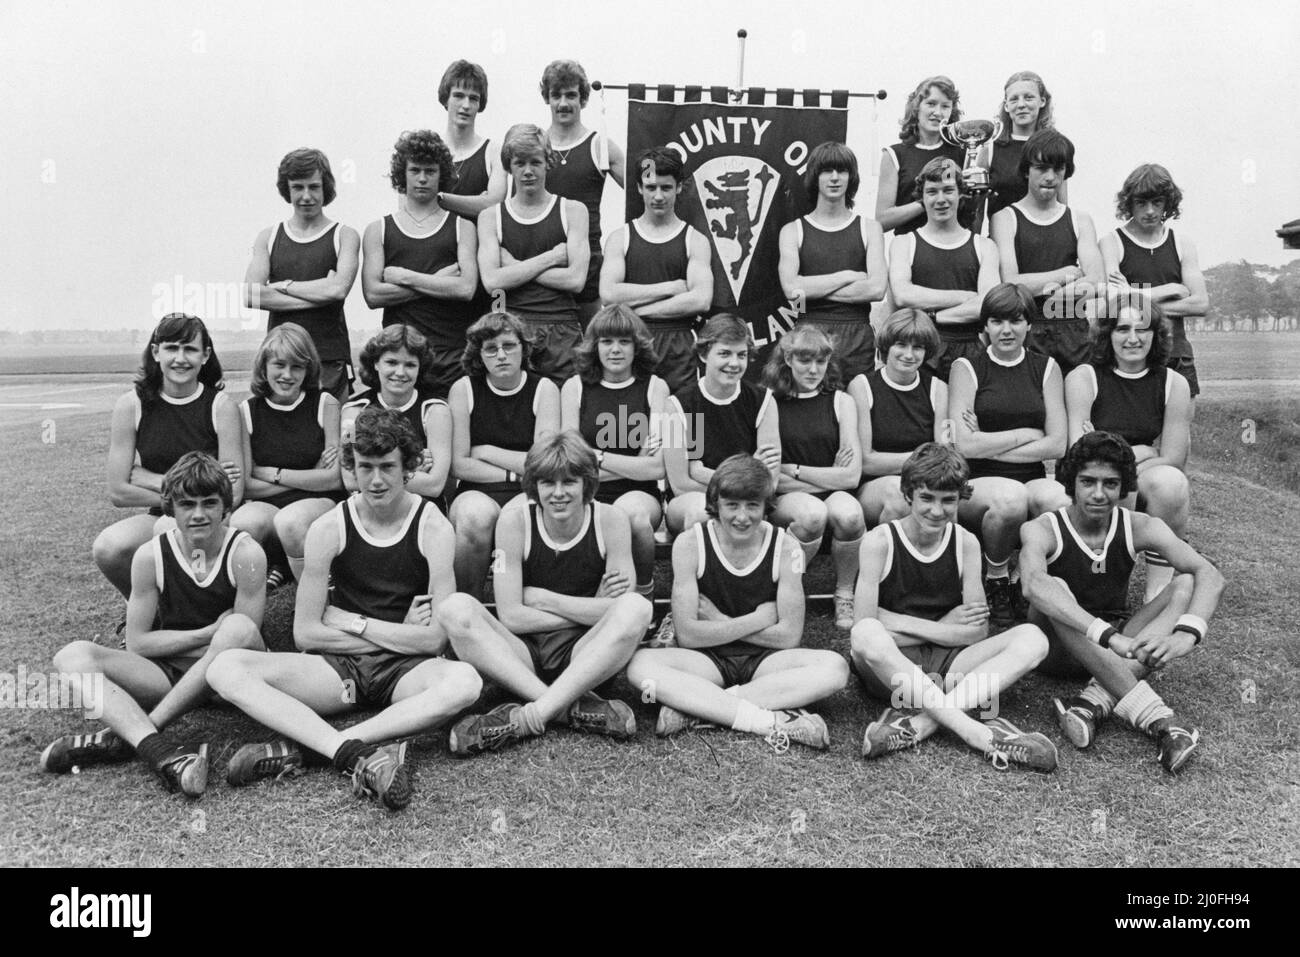 Members of Cleveland Schools Athletics Association who will be competing in the English Schools National Track and Field Championships (Harvey Maddon Stadium, Bilborough, Nottingham July 6th and 7th) pictured during break in training, 20th July 1979. Front Row L to R. Stephen Bell, Mark Chambers, Andrew Hainsworth, Martin Peevor, James Yeats, Stephen Smailes. Second Row L to R. Catherine Walker, Louise Kell, Tracy Banks, Alison Hall, Alison Eddy, Pamela Harkness, Iona Moorby, Nina Griffiths, Kendra Lowe, Diane Ashworth. Third Row L to R. Peter Carling, Mark Robinson, David Walker, Francis O'Co Stock Photo